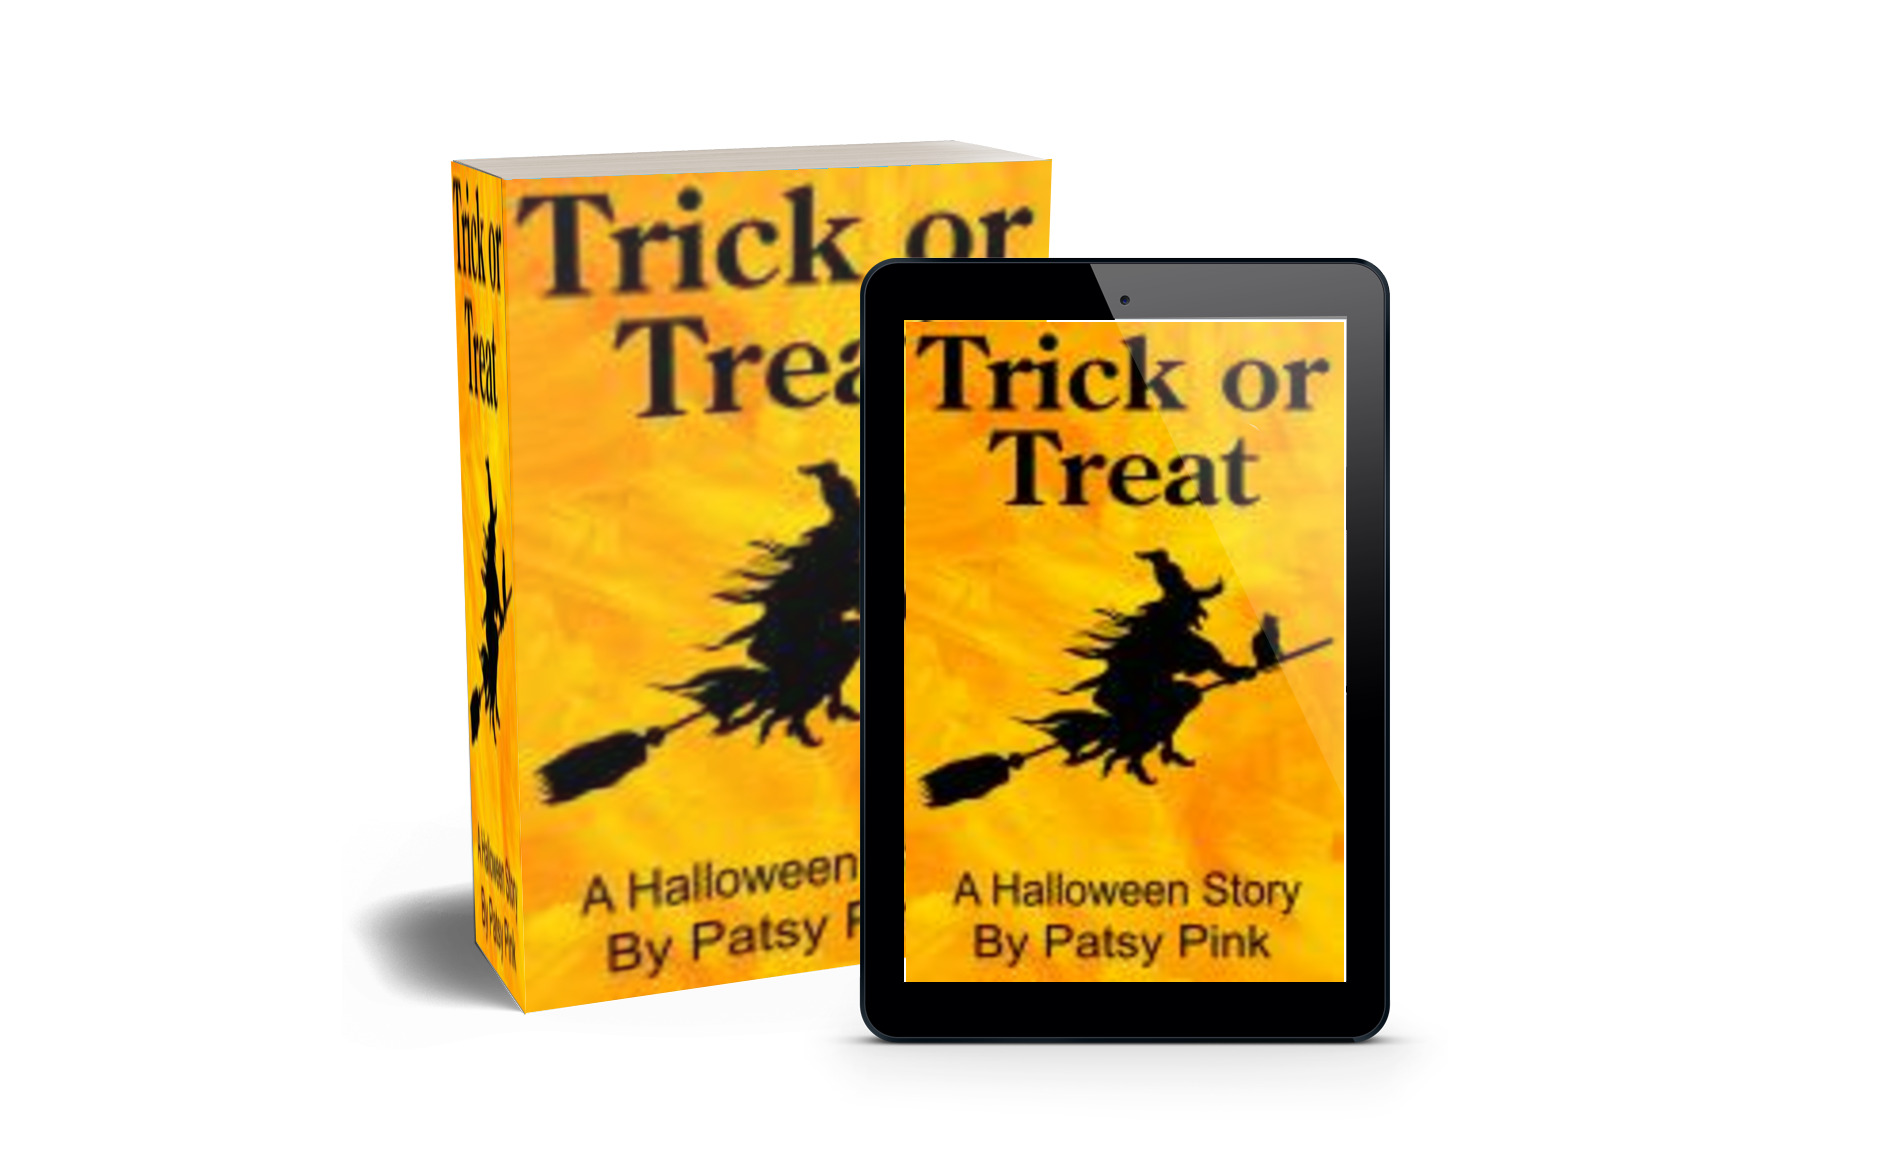 Trick Or Treat is a Halloween story by Patsy Pink storyteller of adventure and magic. Are you ready to begin your adventure into the world of possibility?